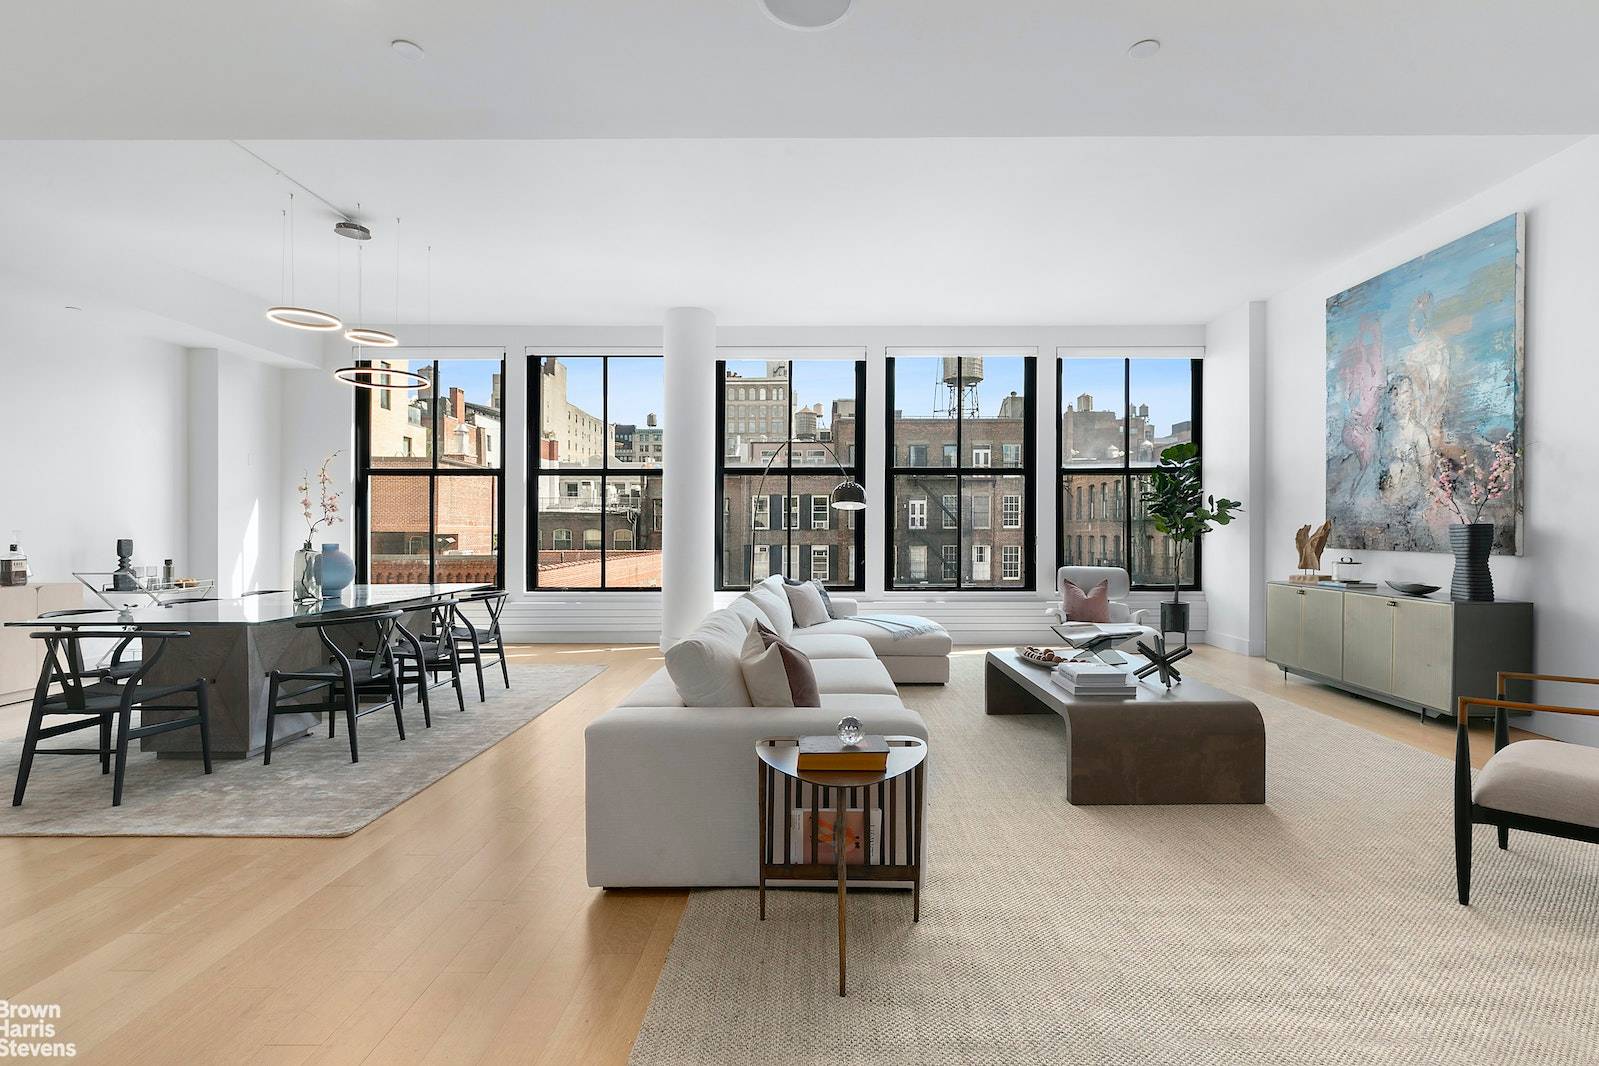 Trophy 4 BR Penthouse in Full Service BuildingSponsor Unit with No Board Approval RequiredWelcome to this unparalleled 4 bedroom, 4 bathroom trophy penthouse located in the heart of SoHo one ...